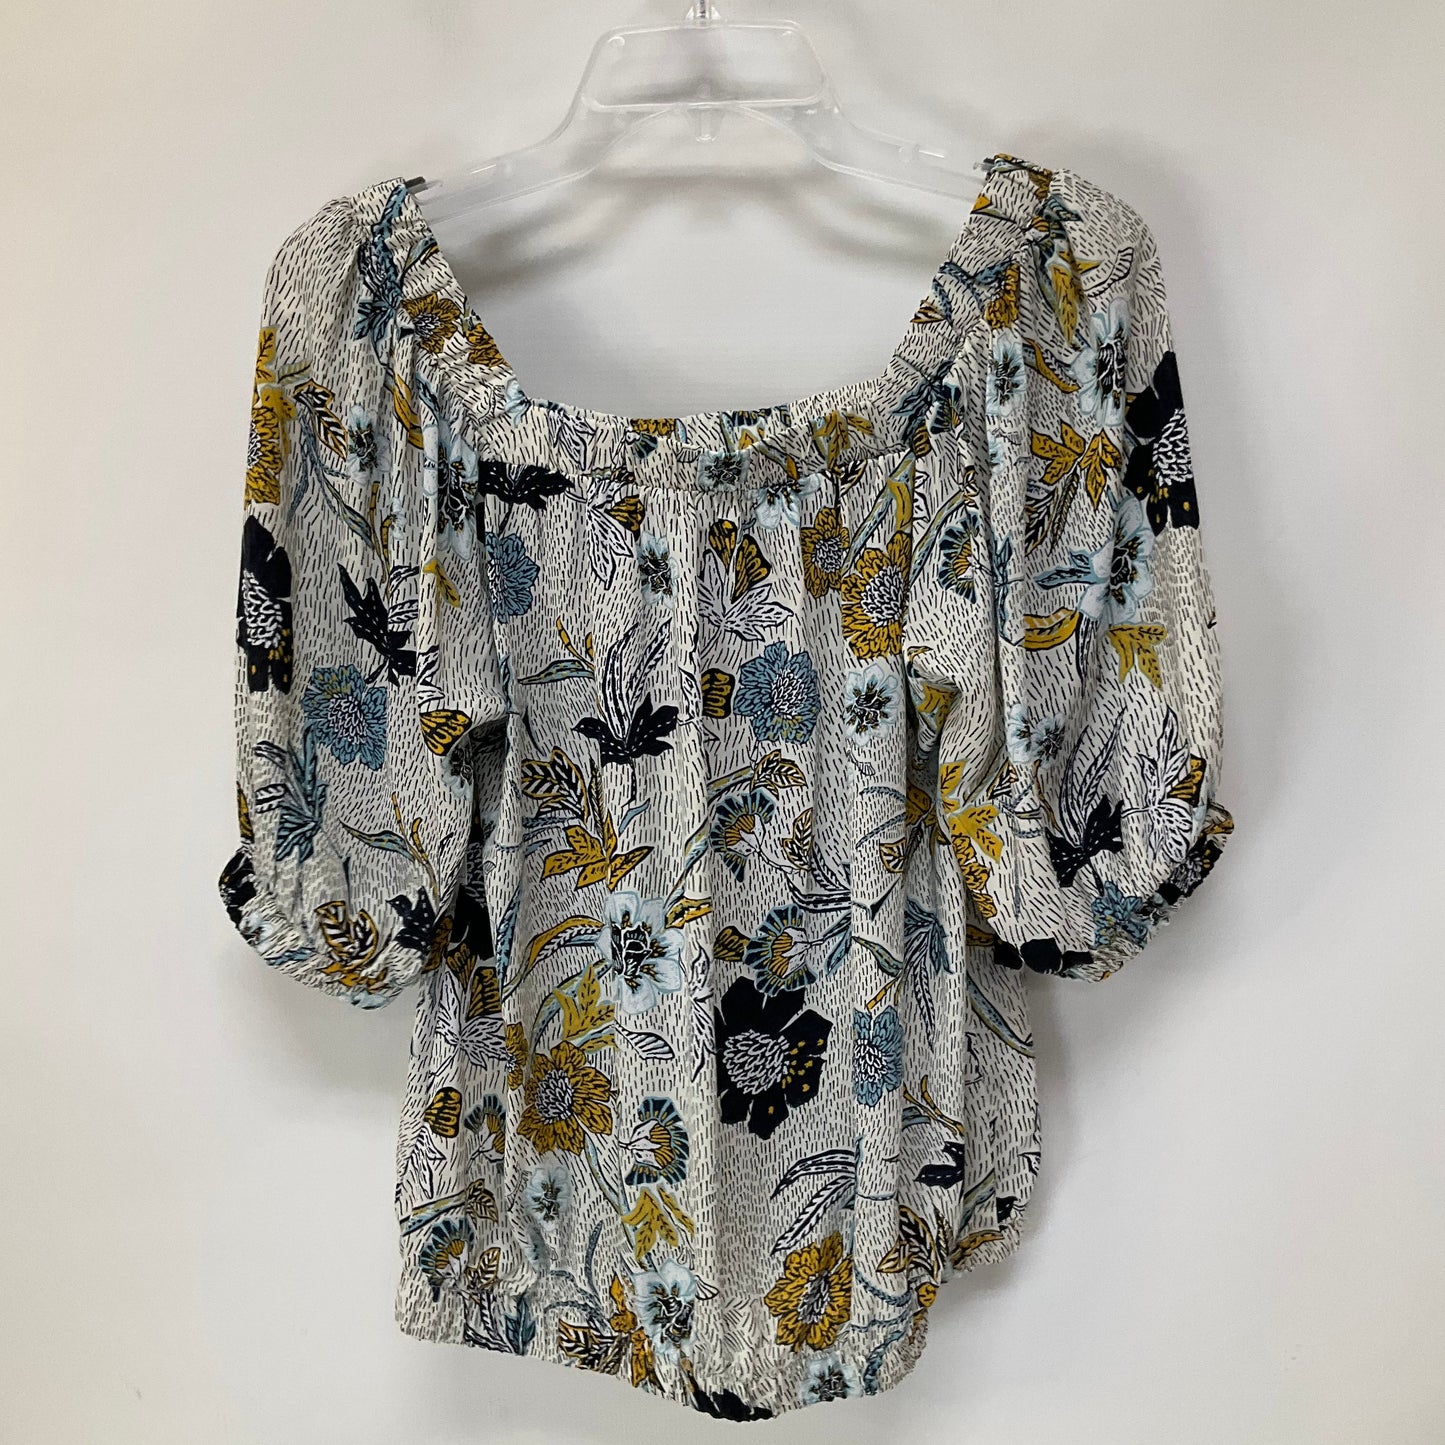 Floral Print Top Short Sleeve Evereve, Size S